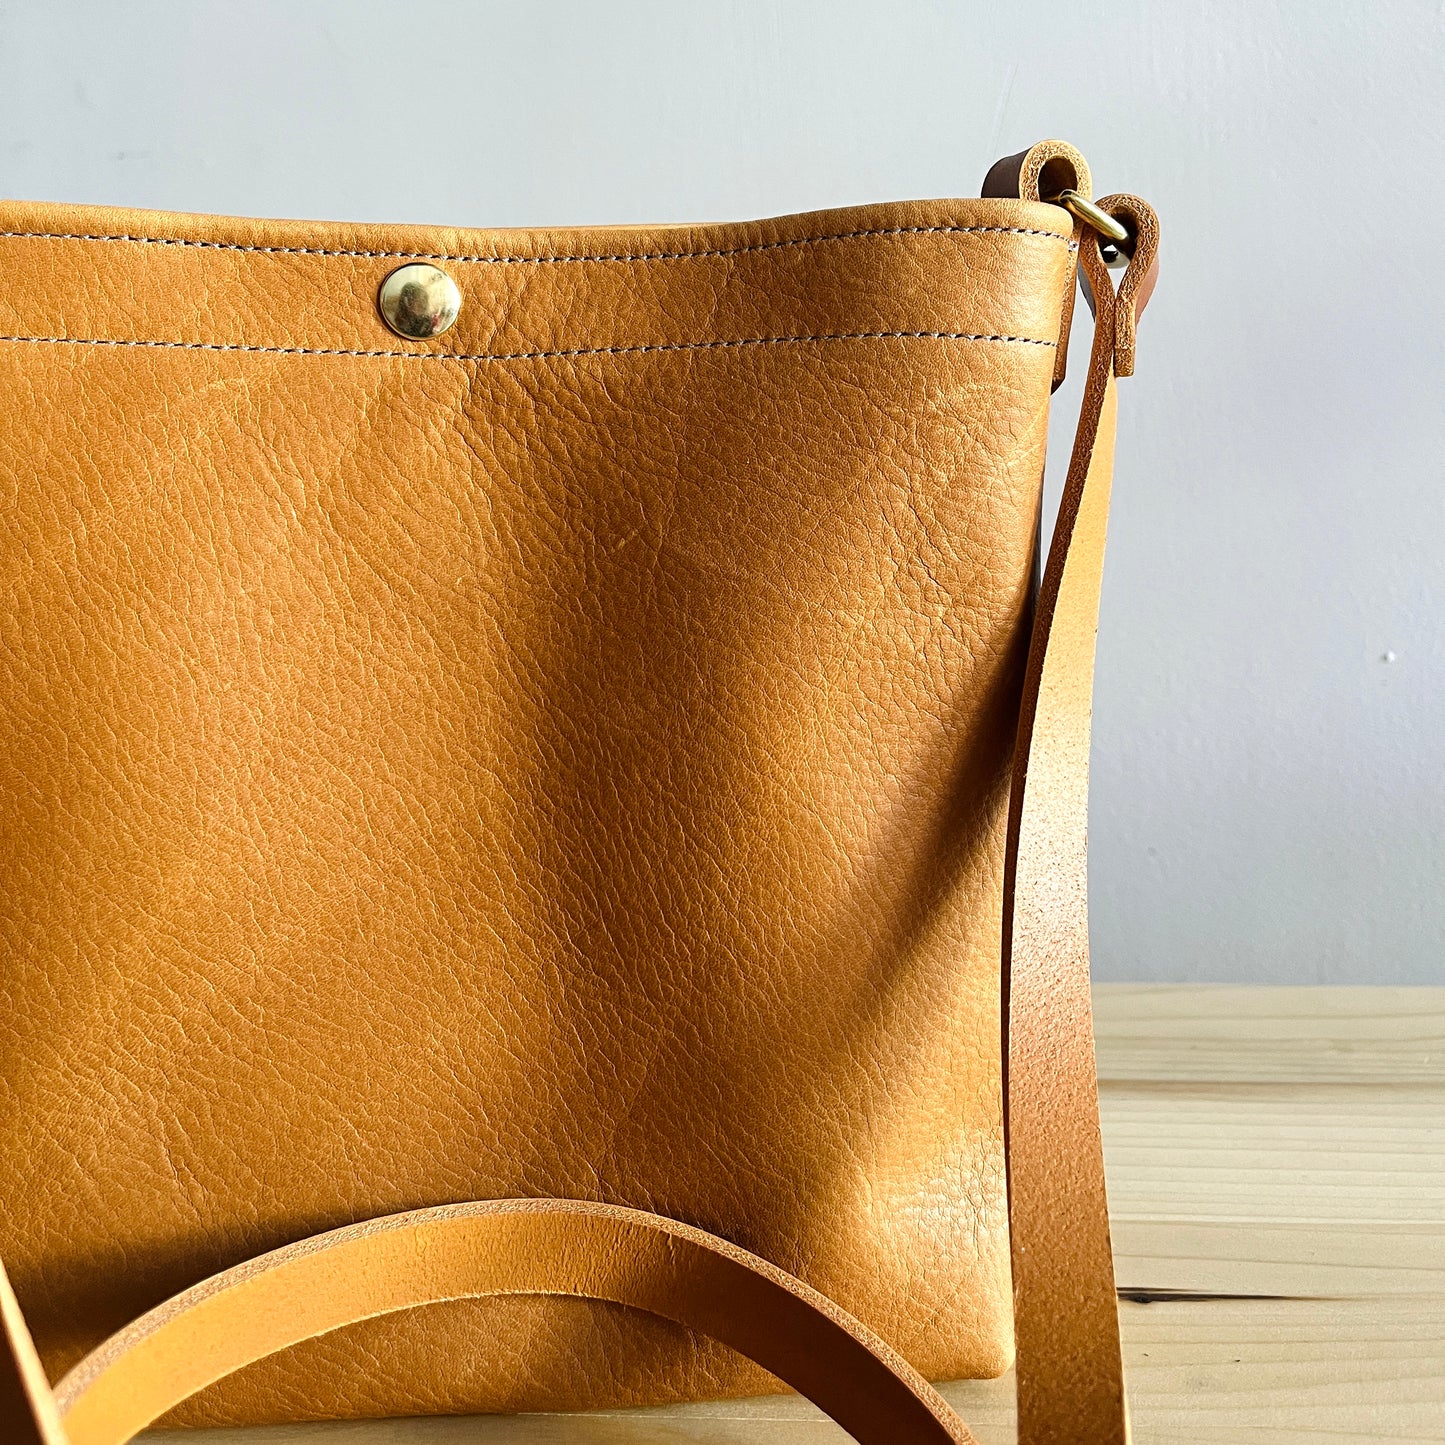 Tan leather crossbody bag with snap